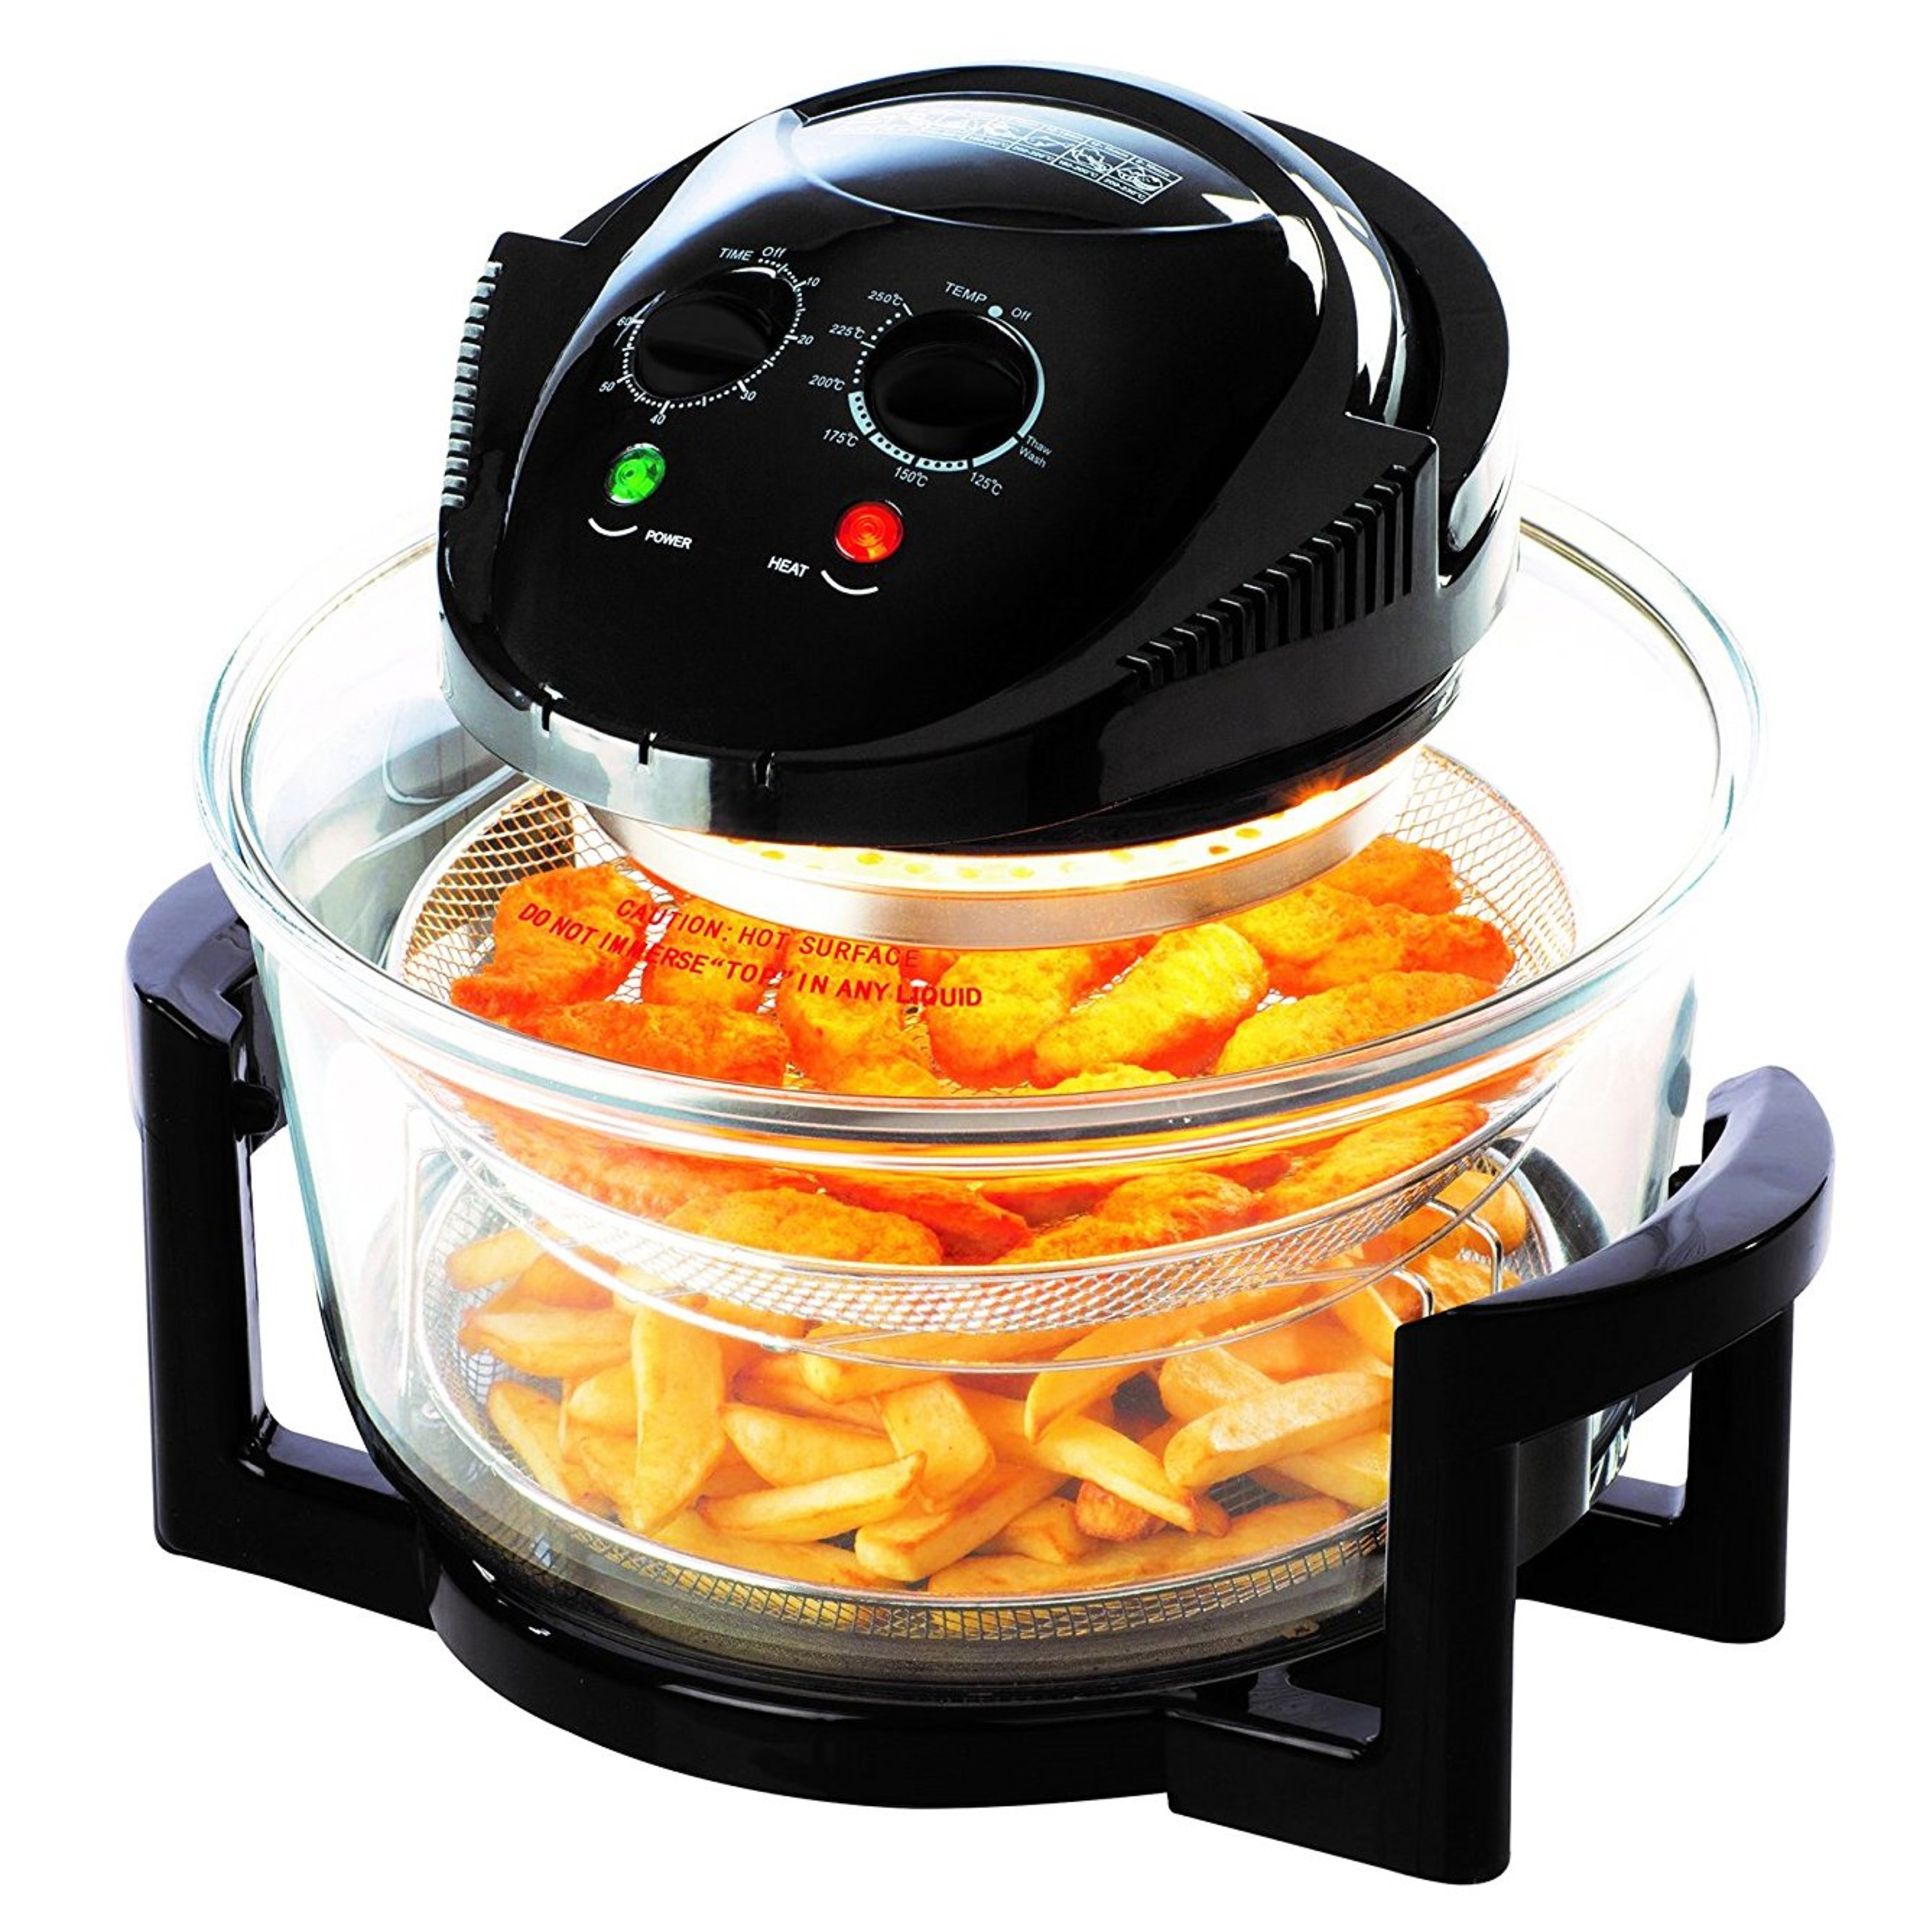 (F45) 12L Litre Black Portable Halogen Convection Oven Cooker 1400W Cook Food 60% Quicker Than...